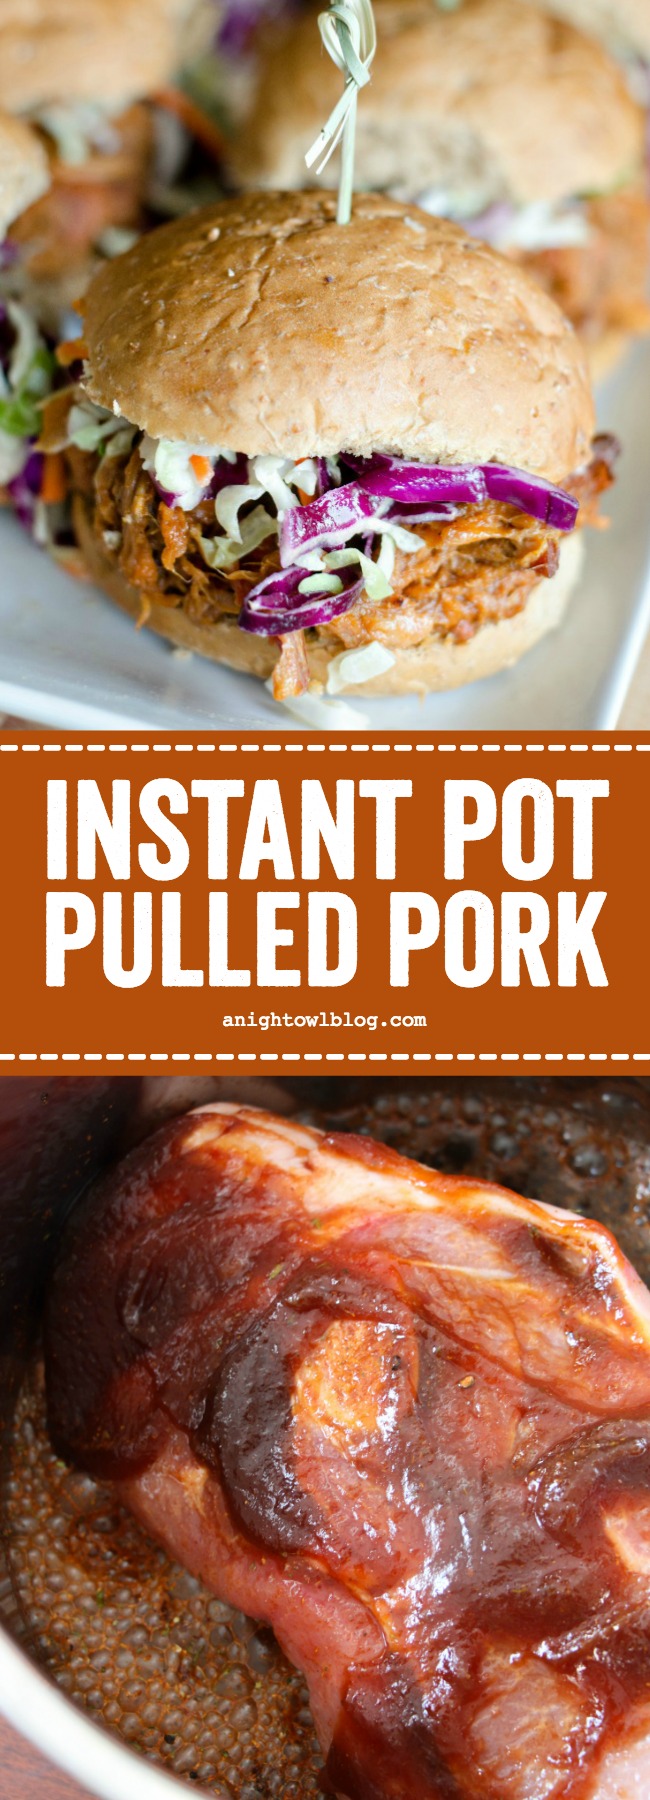 Made with an easy homemade BBQ sauce, this Instant Pot BBQ Pulled Pork is perfect for game day or your summer parties!